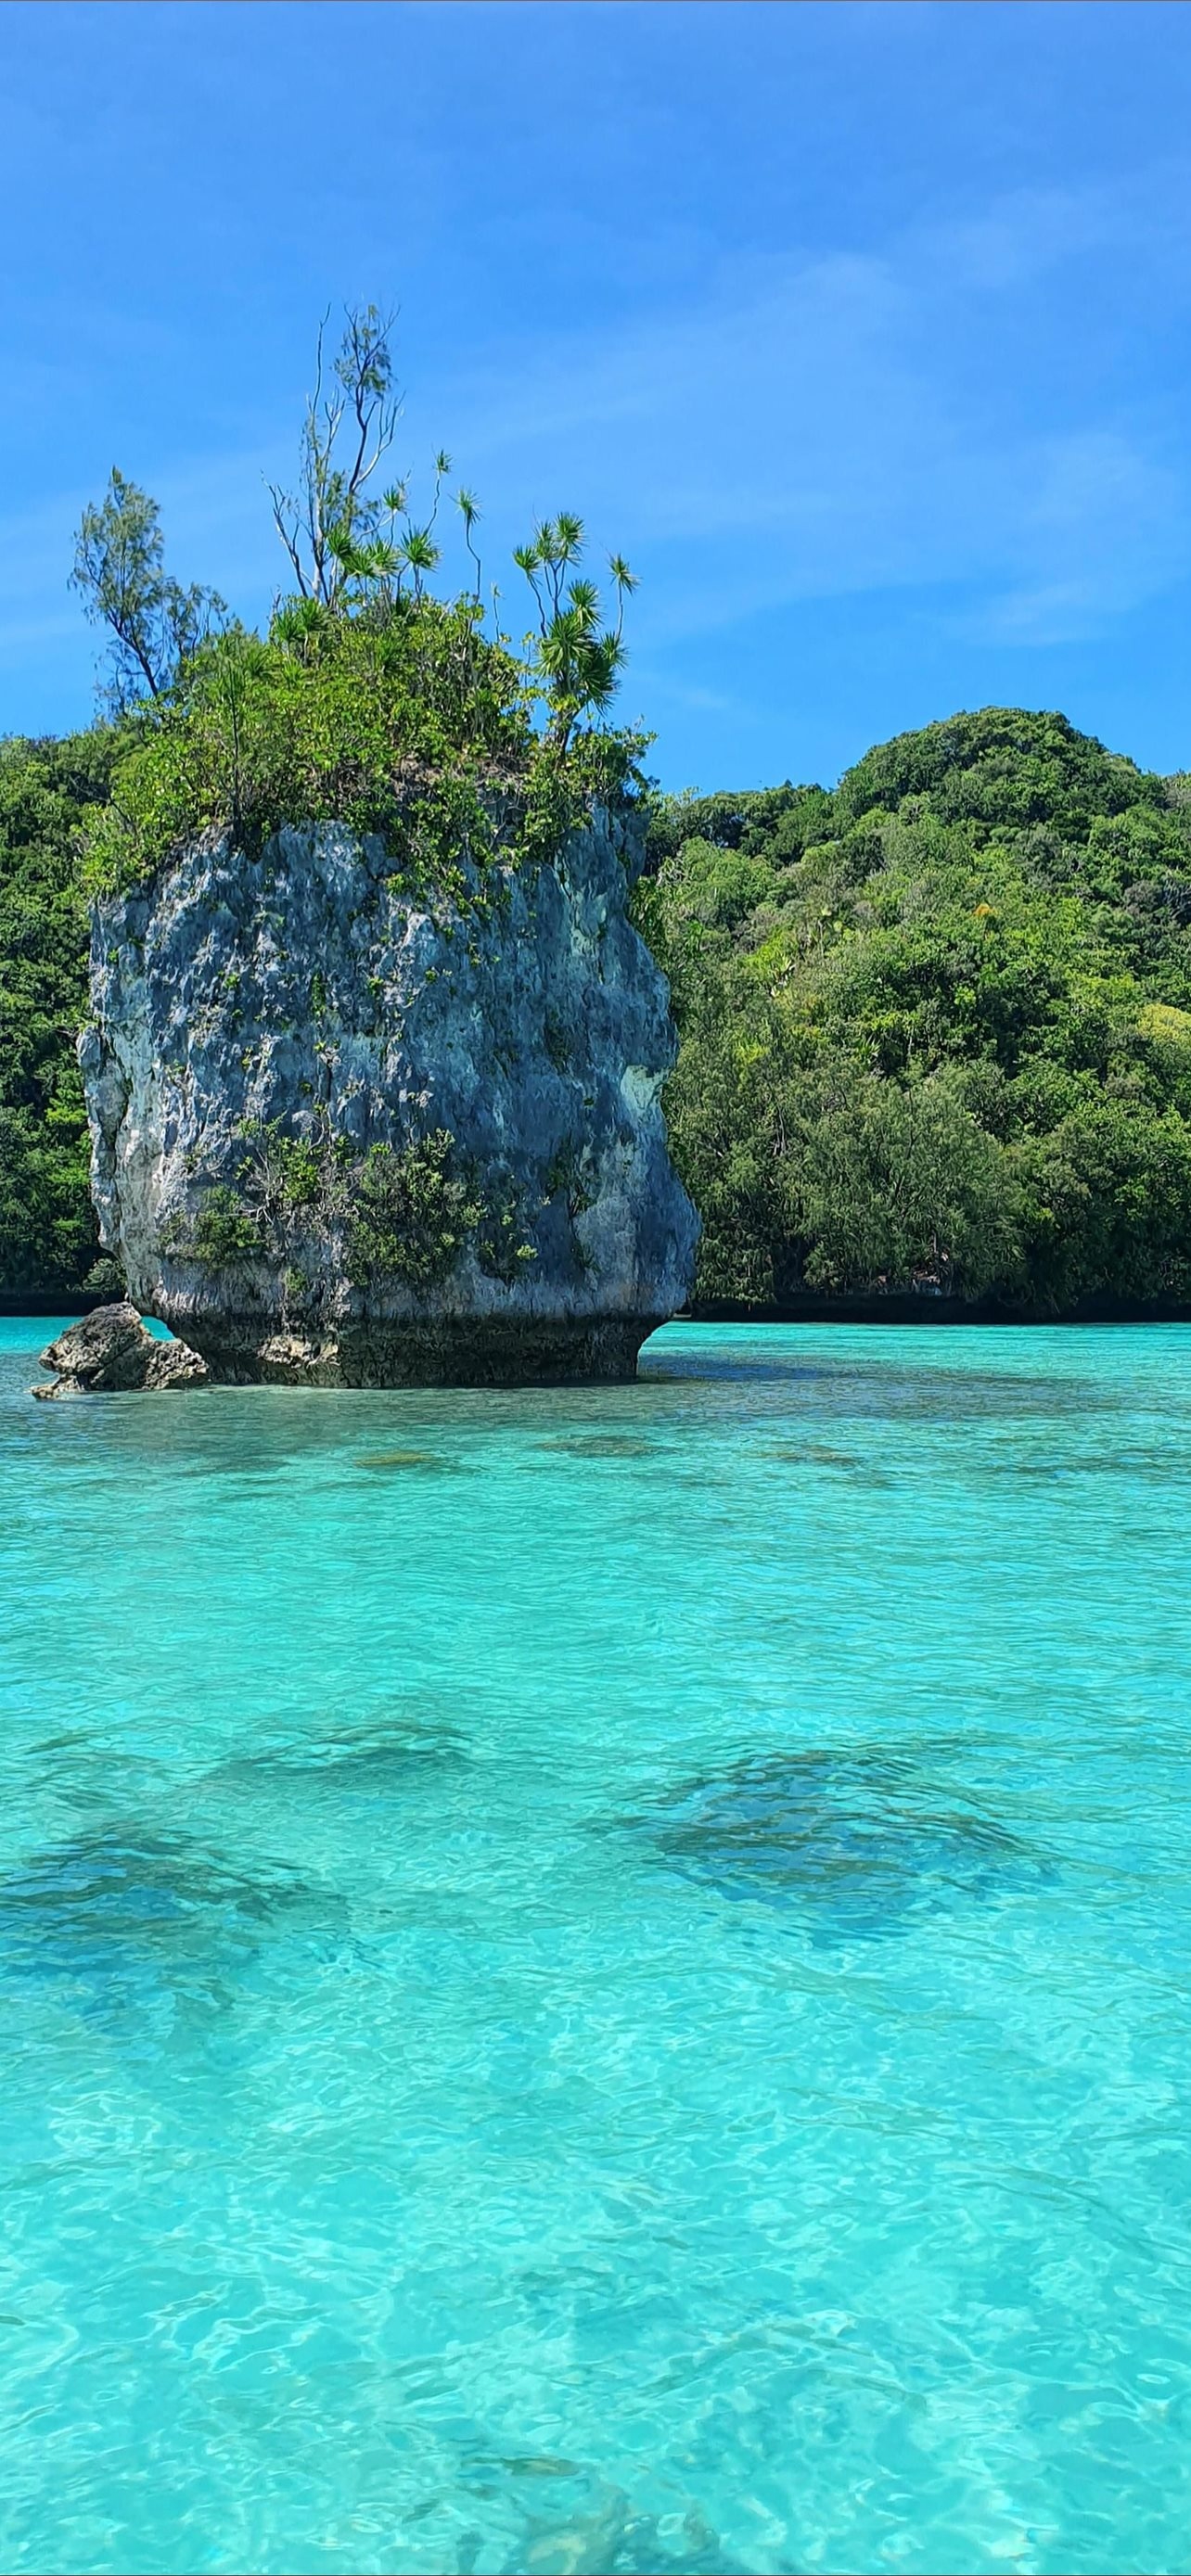 Palau iPhone wallpapers, Stunning island scenery, Mobile beauty, Free download, 1290x2780 HD Phone